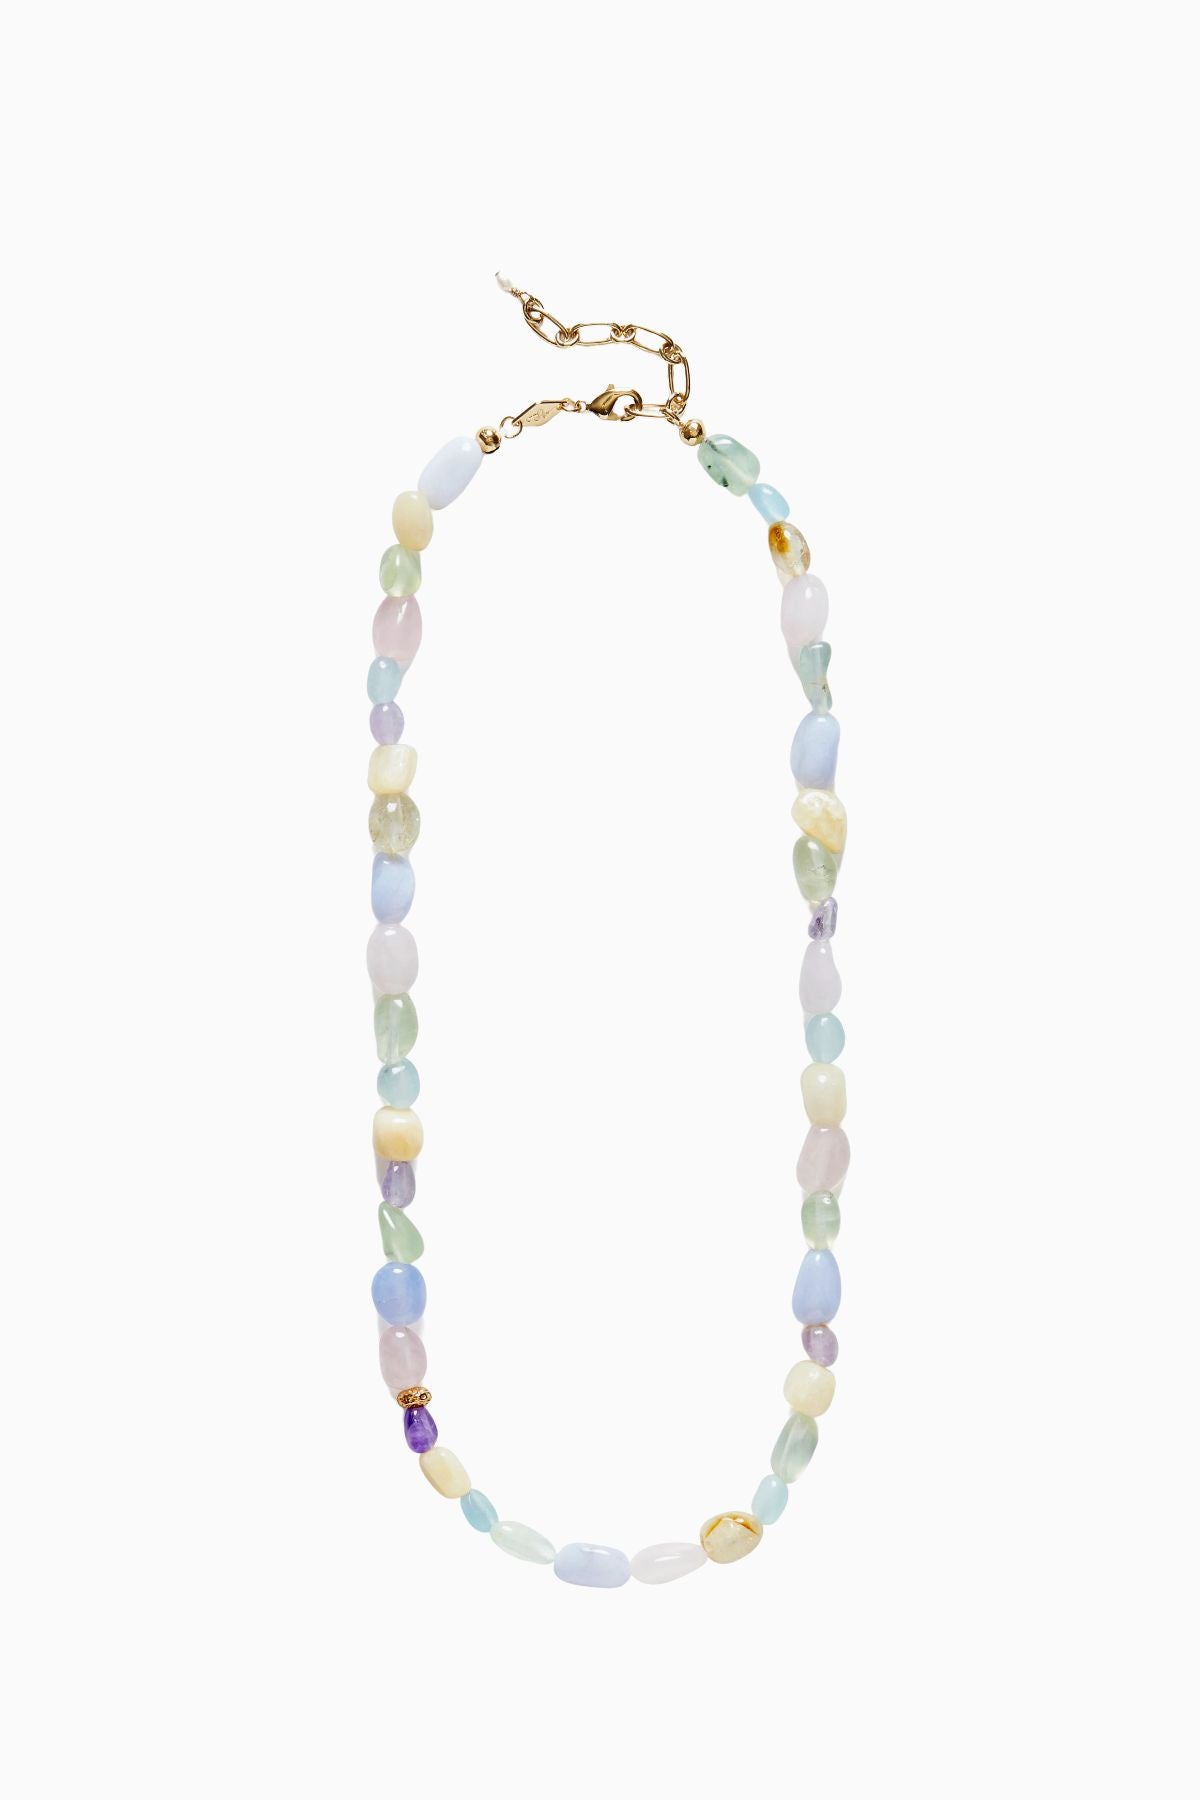 Anni Lu Candy Lover Necklace - Gold